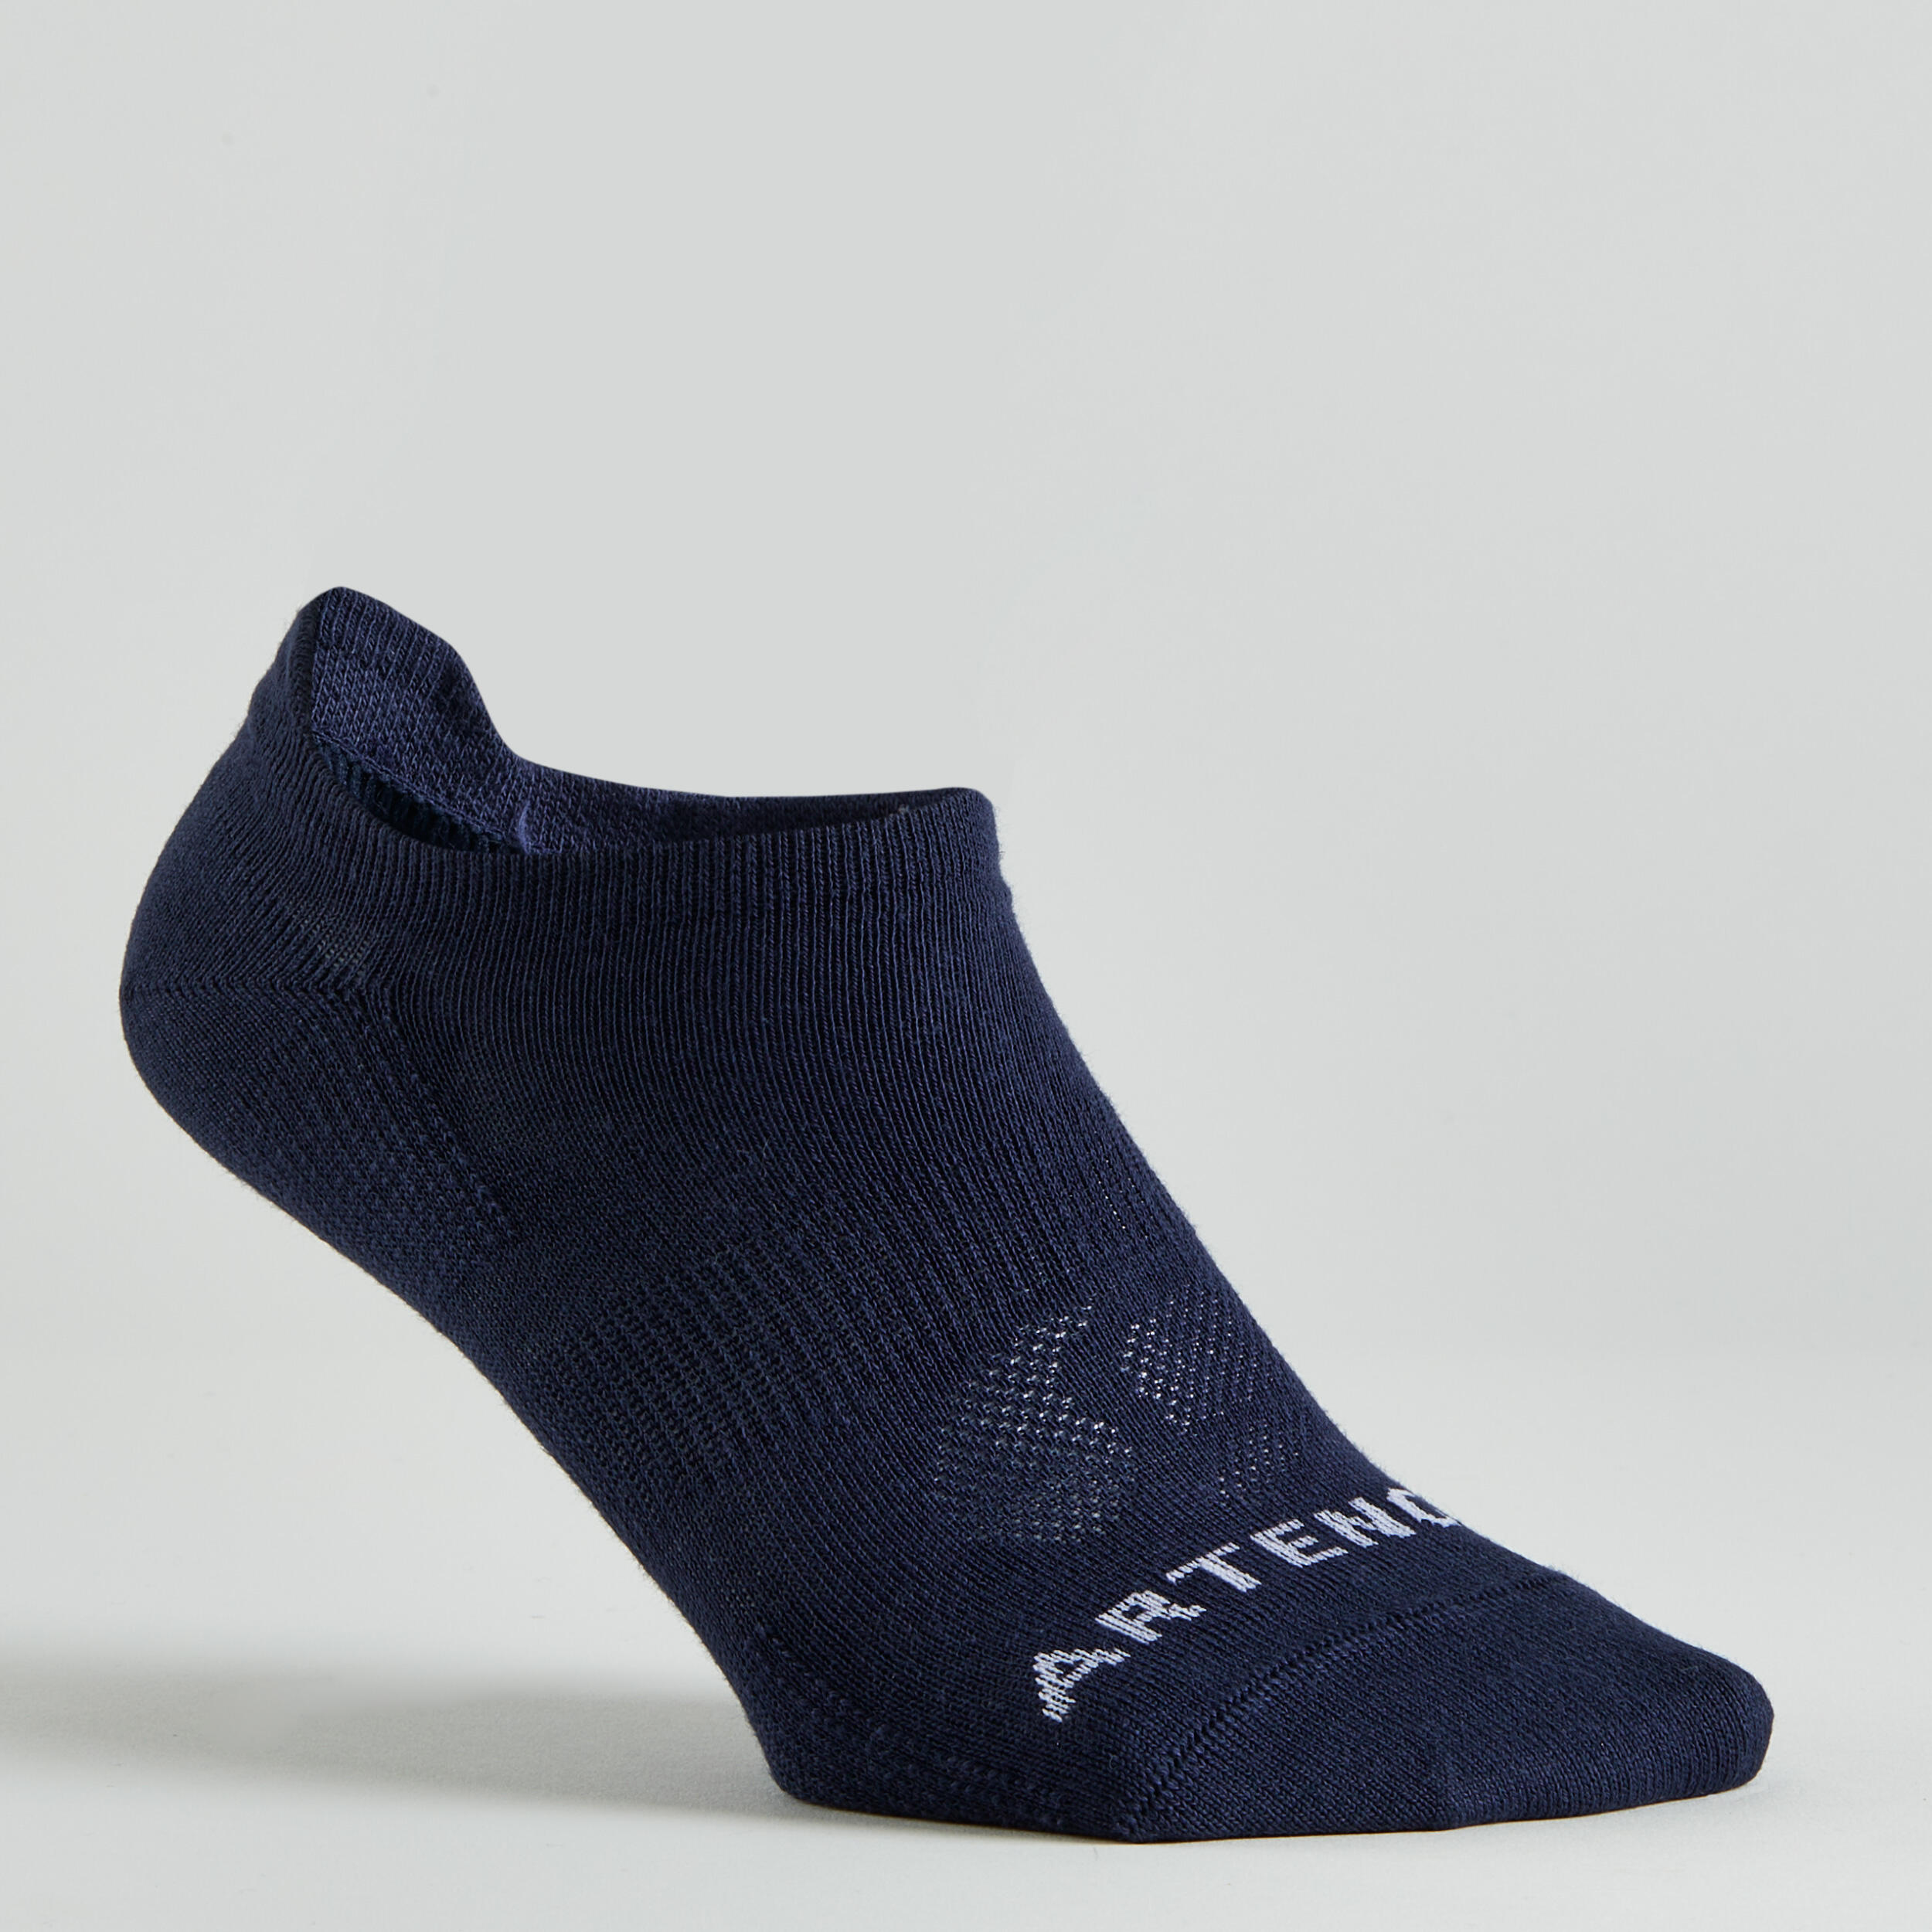 Low Sports Socks RS 160 Tri-Pack - Apricot/Pink/Navy 4/14